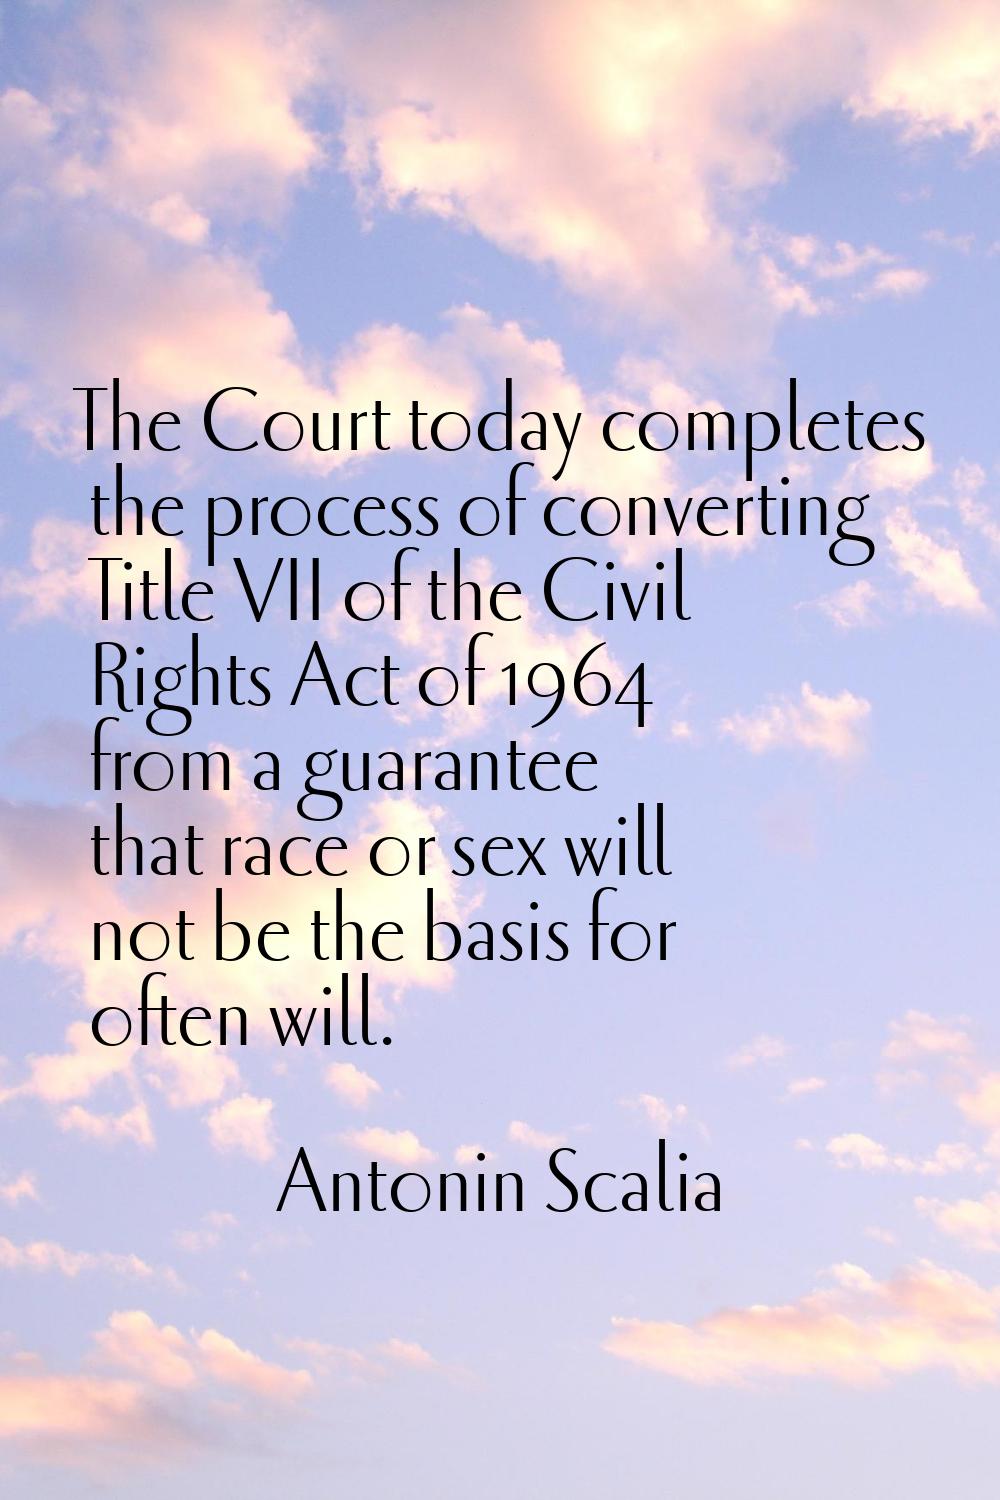 The Court today completes the process of converting Title VII of the Civil Rights Act of 1964 from 